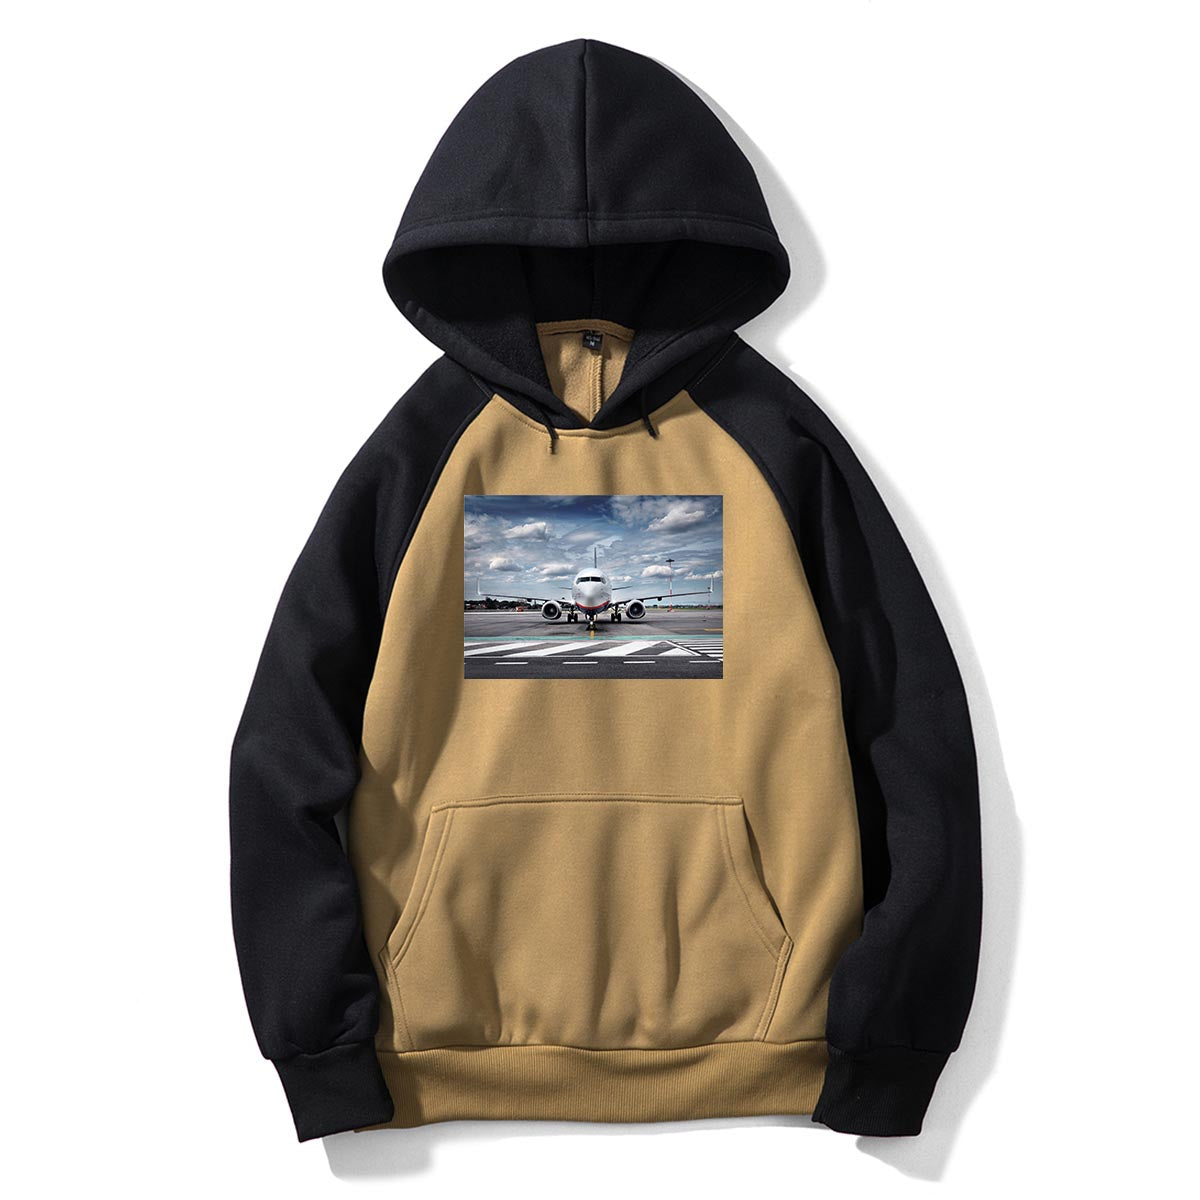 Amazing Clouds and Boeing 737 NG Designed Colourful Hoodies